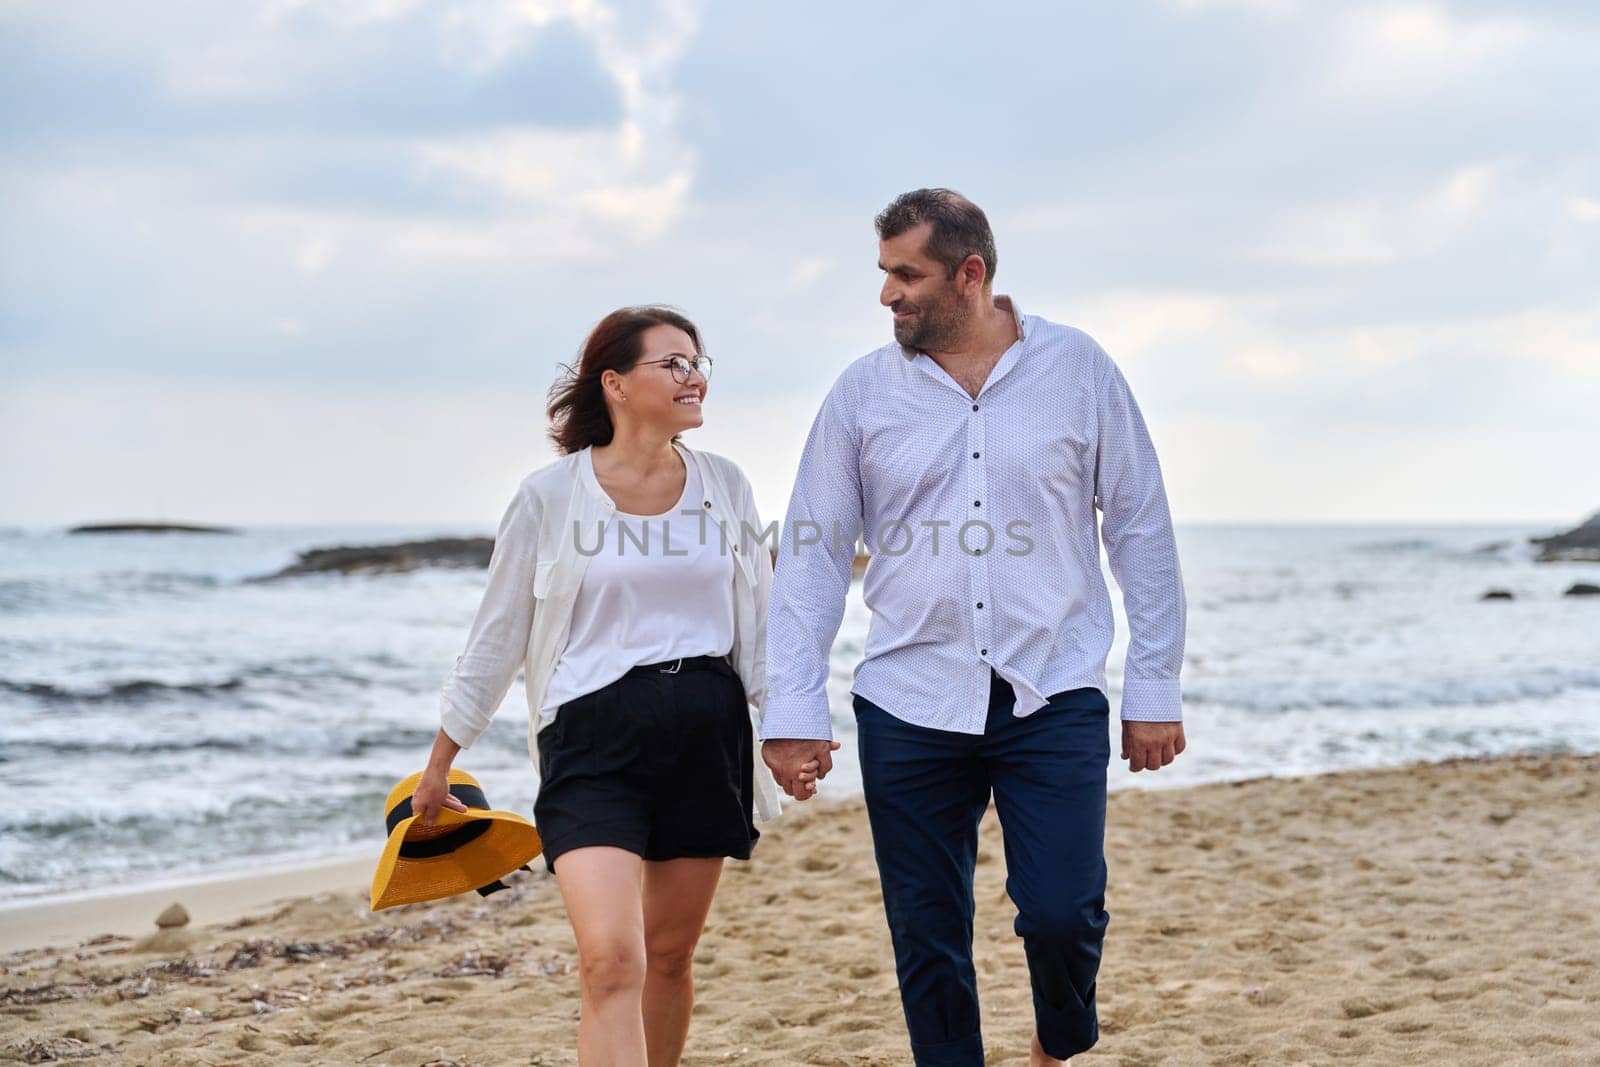 Happy middle-aged couple walking together on the beach. Mature man and woman holding hands walking along seashore. Relationship, lifestyle, vacation, tourism, sea nature, people concept